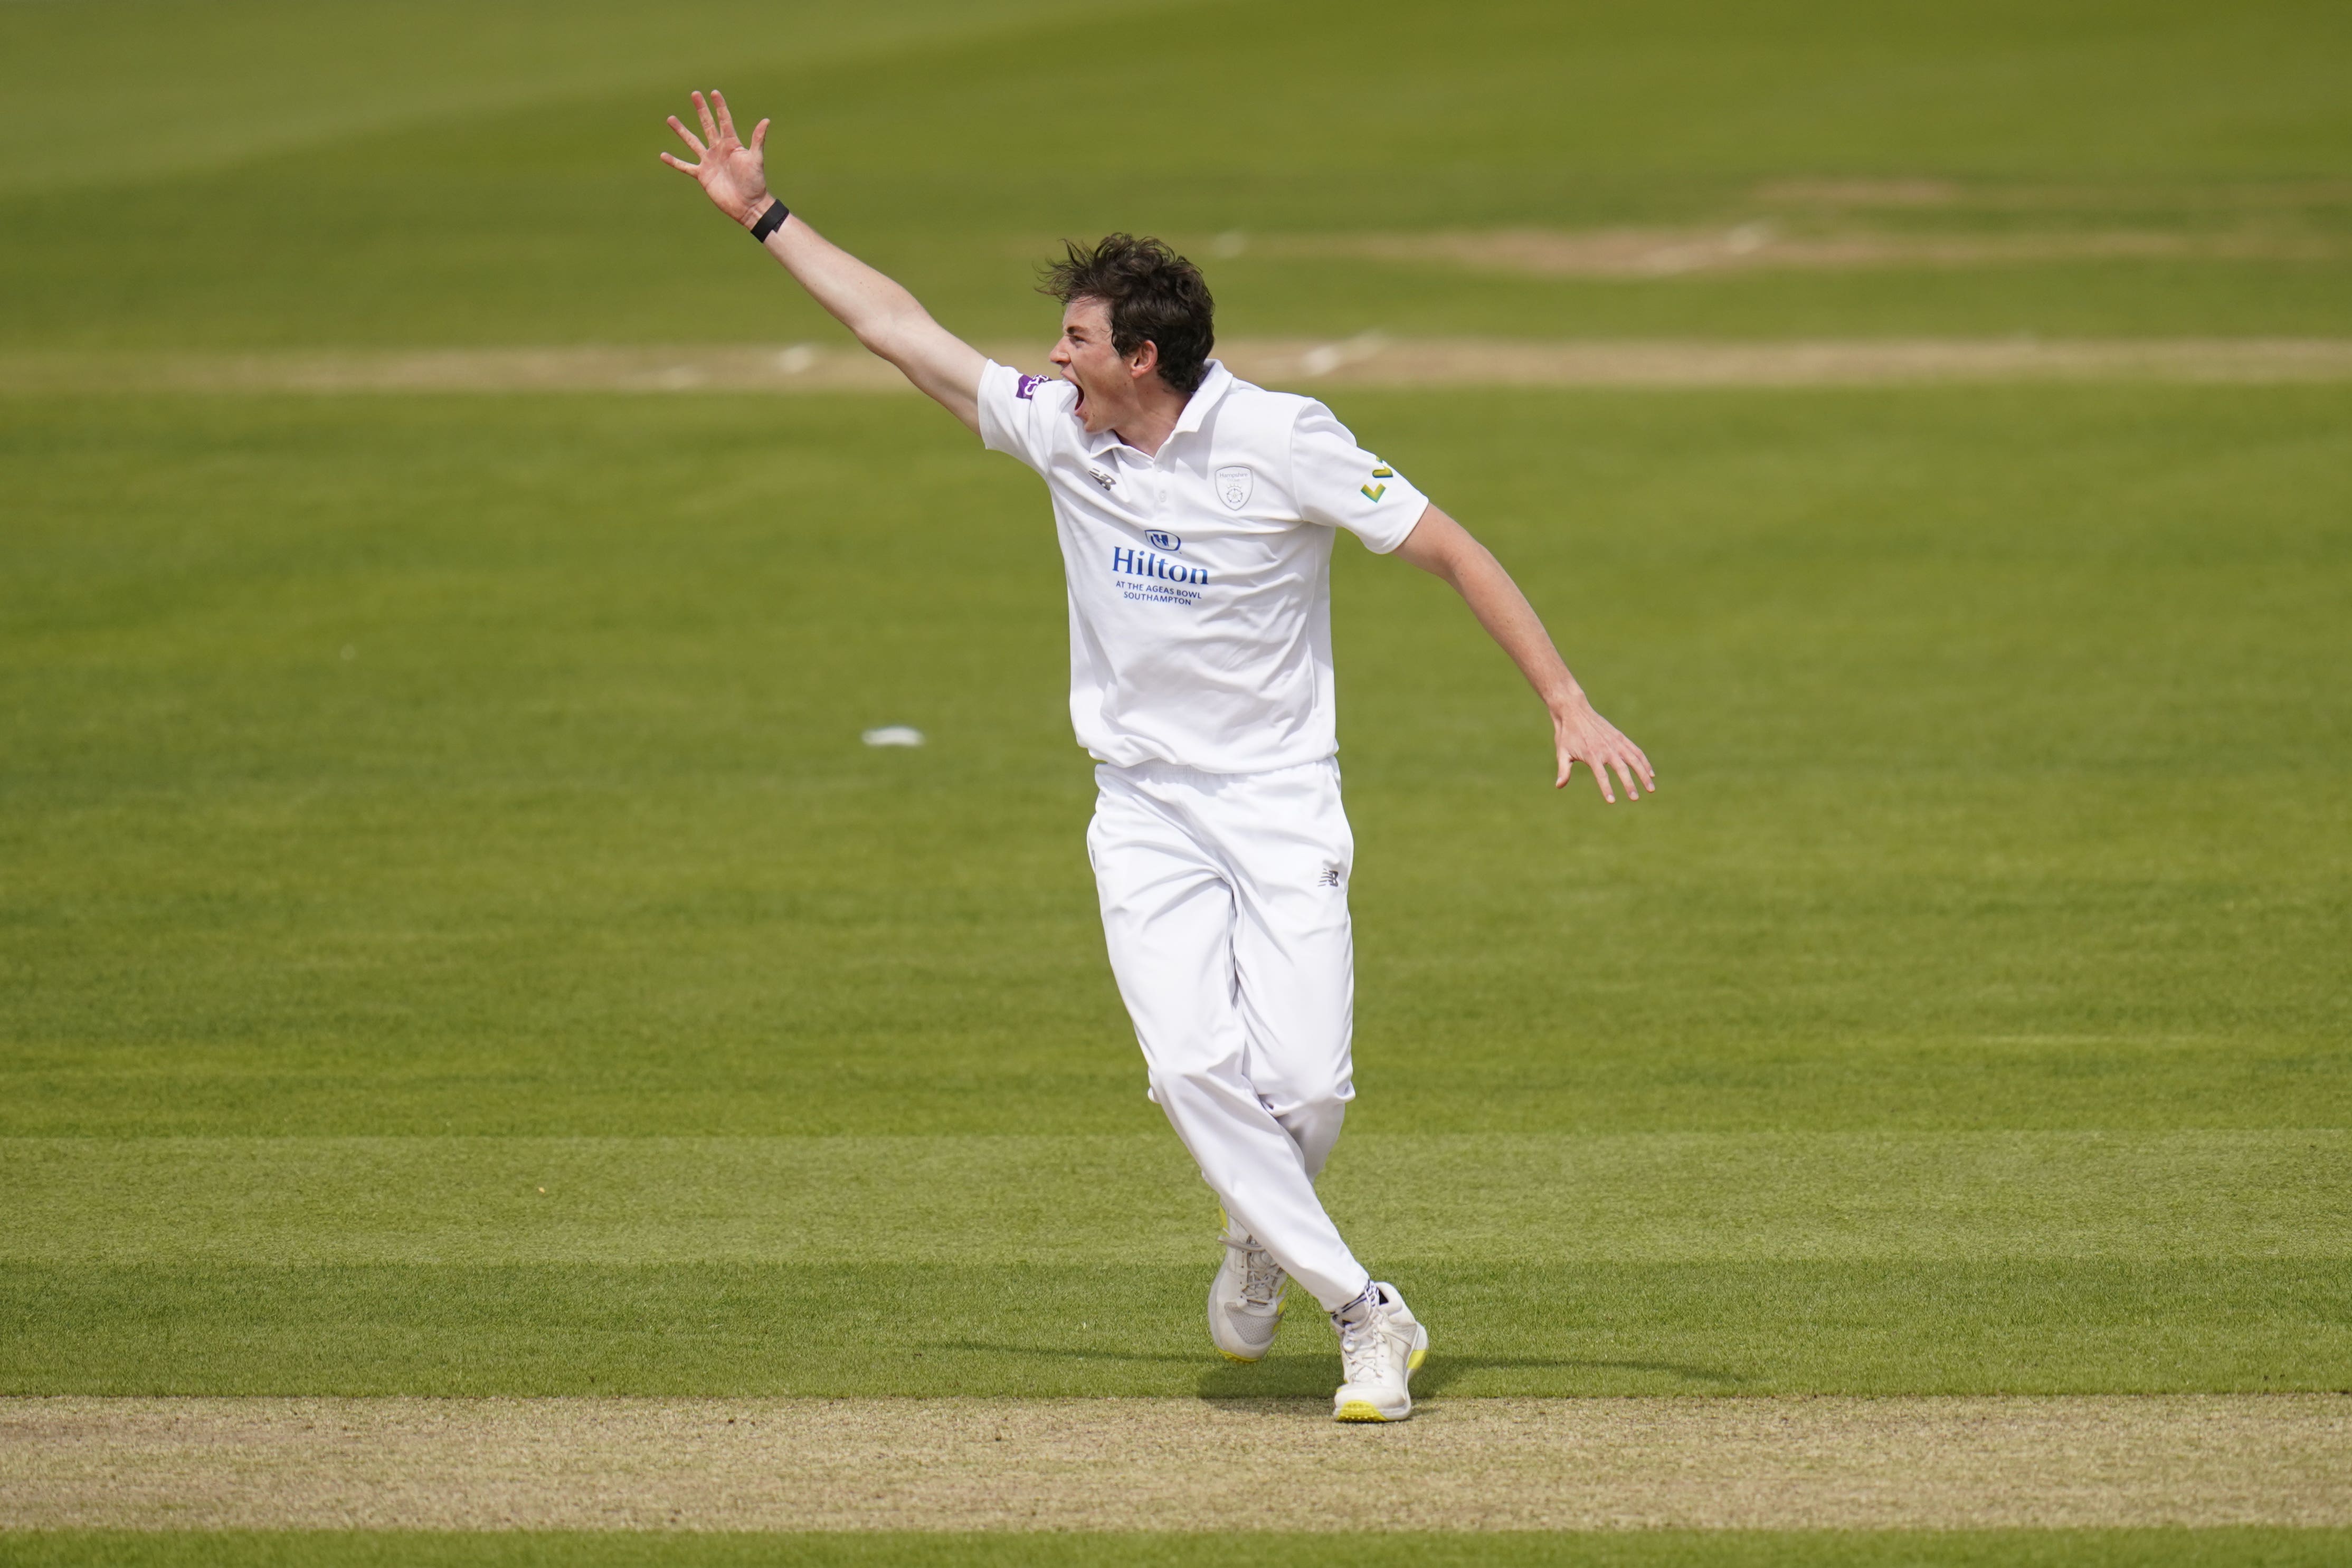 John Turner’s contribution with the ball was key for Hampshire (Andrew Matthews/PA)